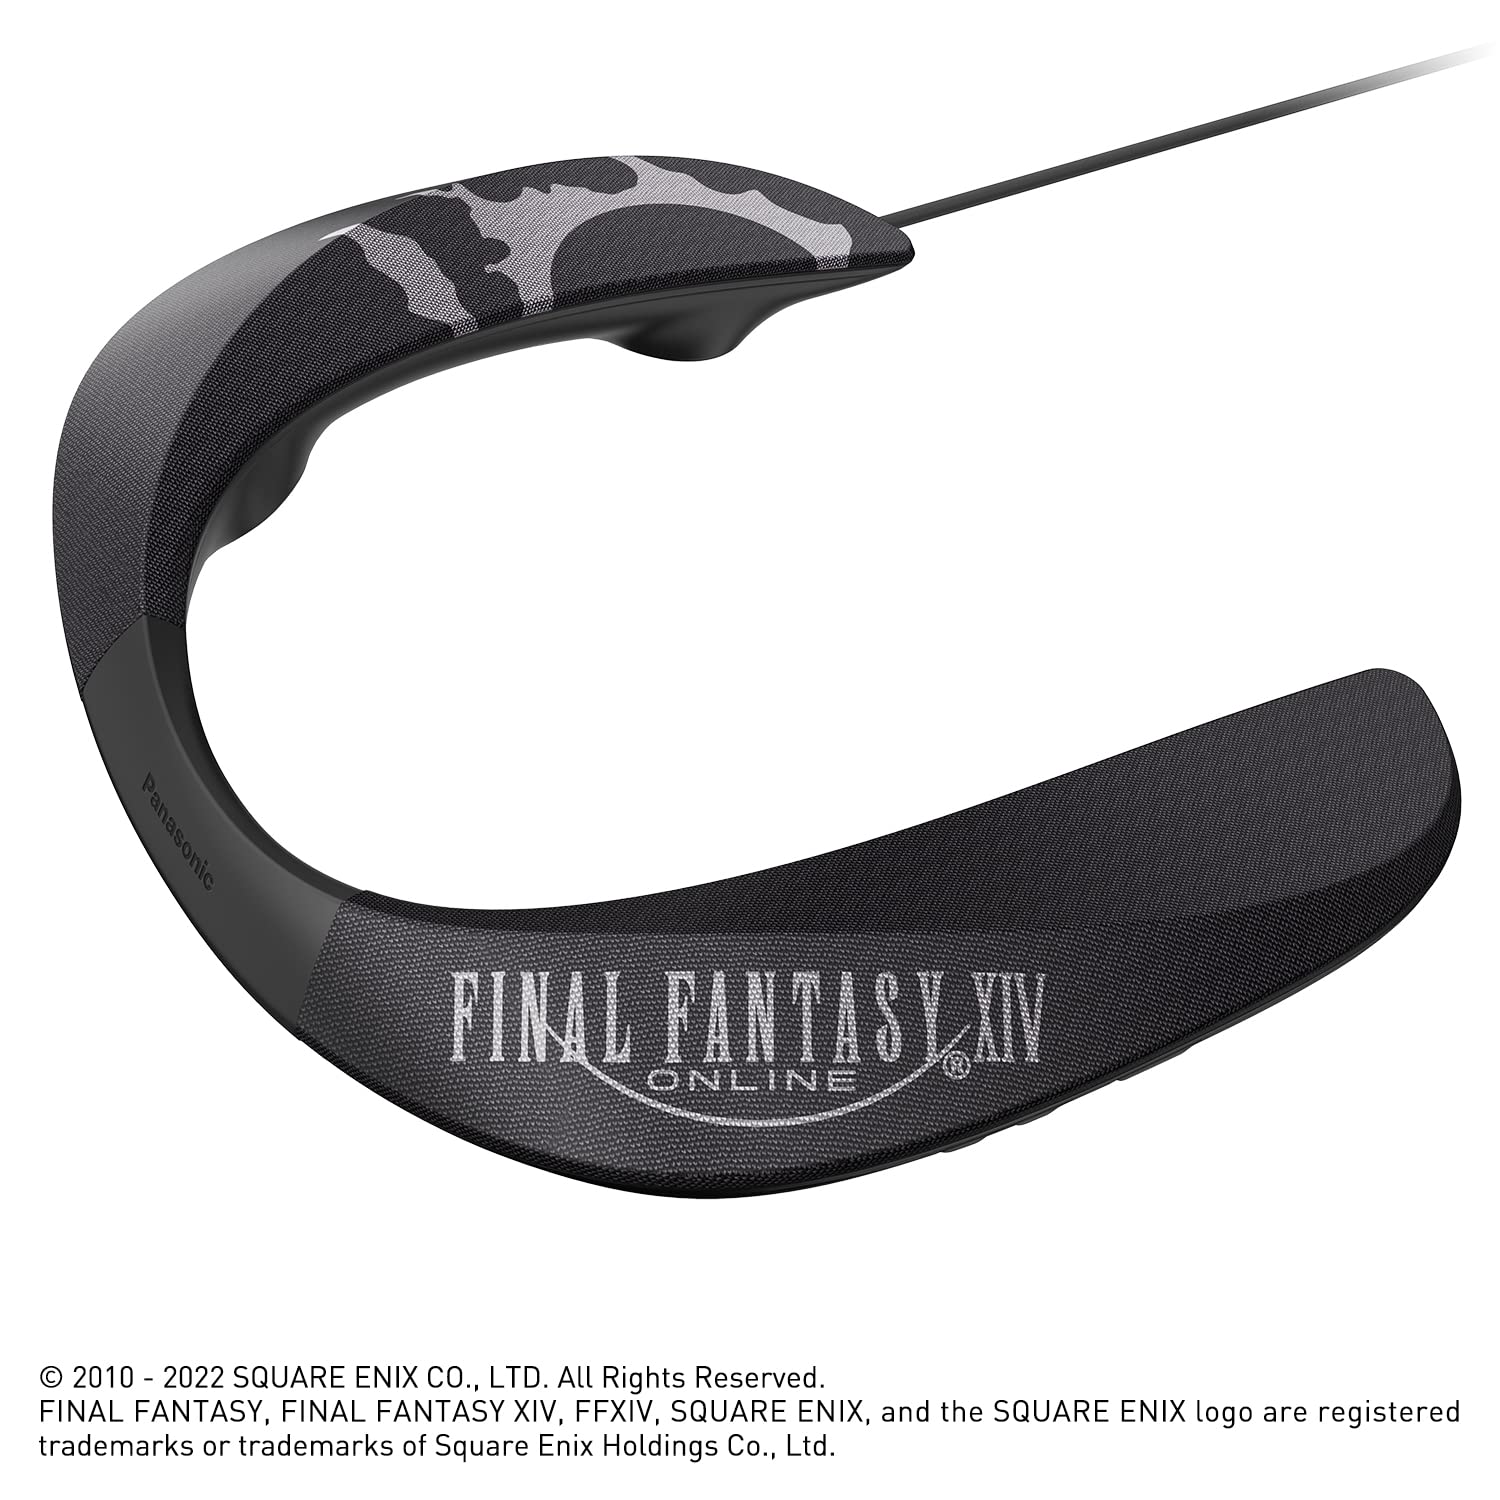 Panasonic SoundSlayer Final Fantasy XIV Online Edition Wearable Gaming Speaker, Lightweight Wired Neck Speaker with Built-in Microphone and Dimensional Sound - SC-GN01PPFF (Black)